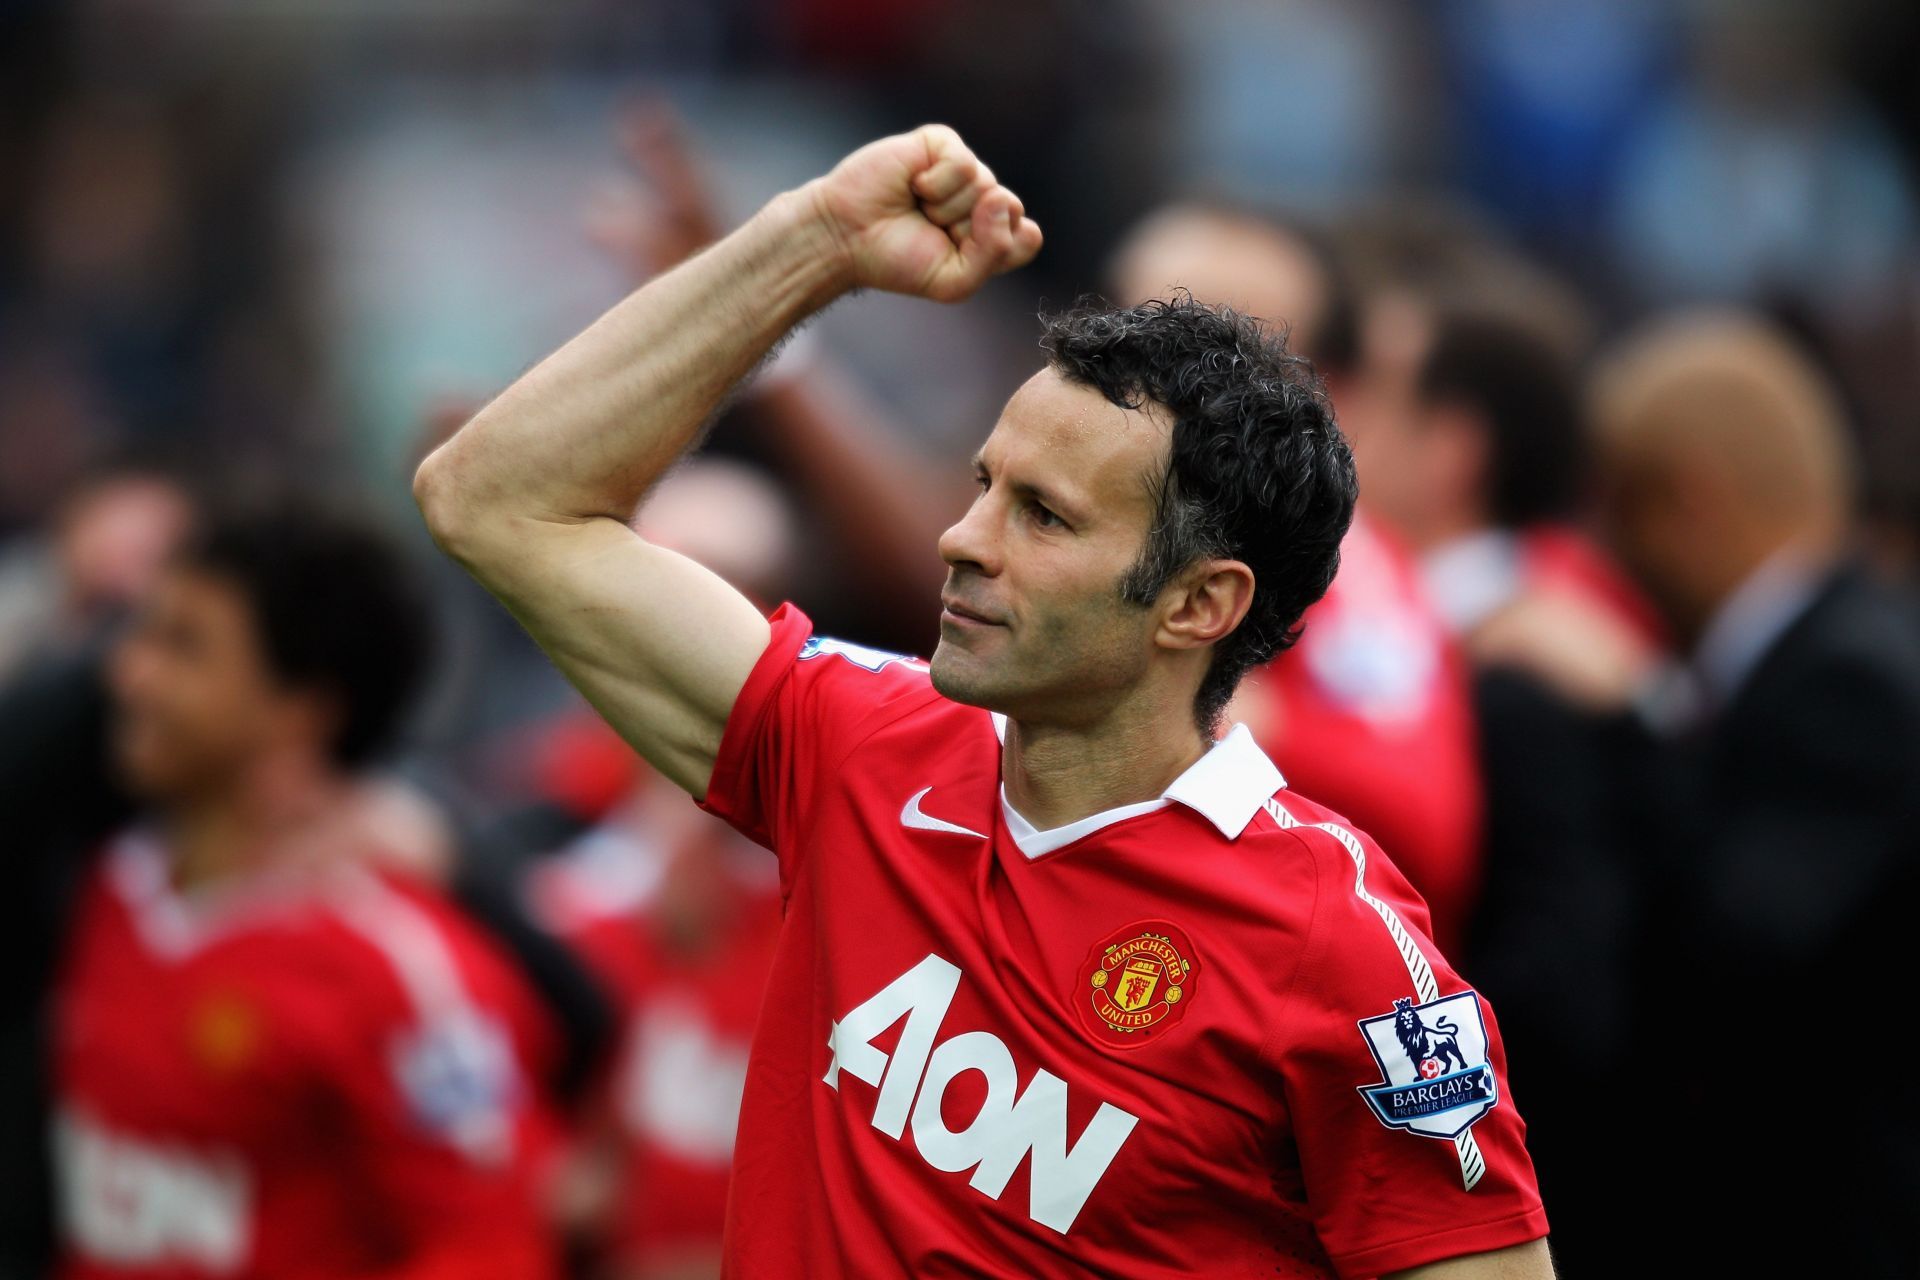 Ryan Giggs spent his entire career at Manchester United.